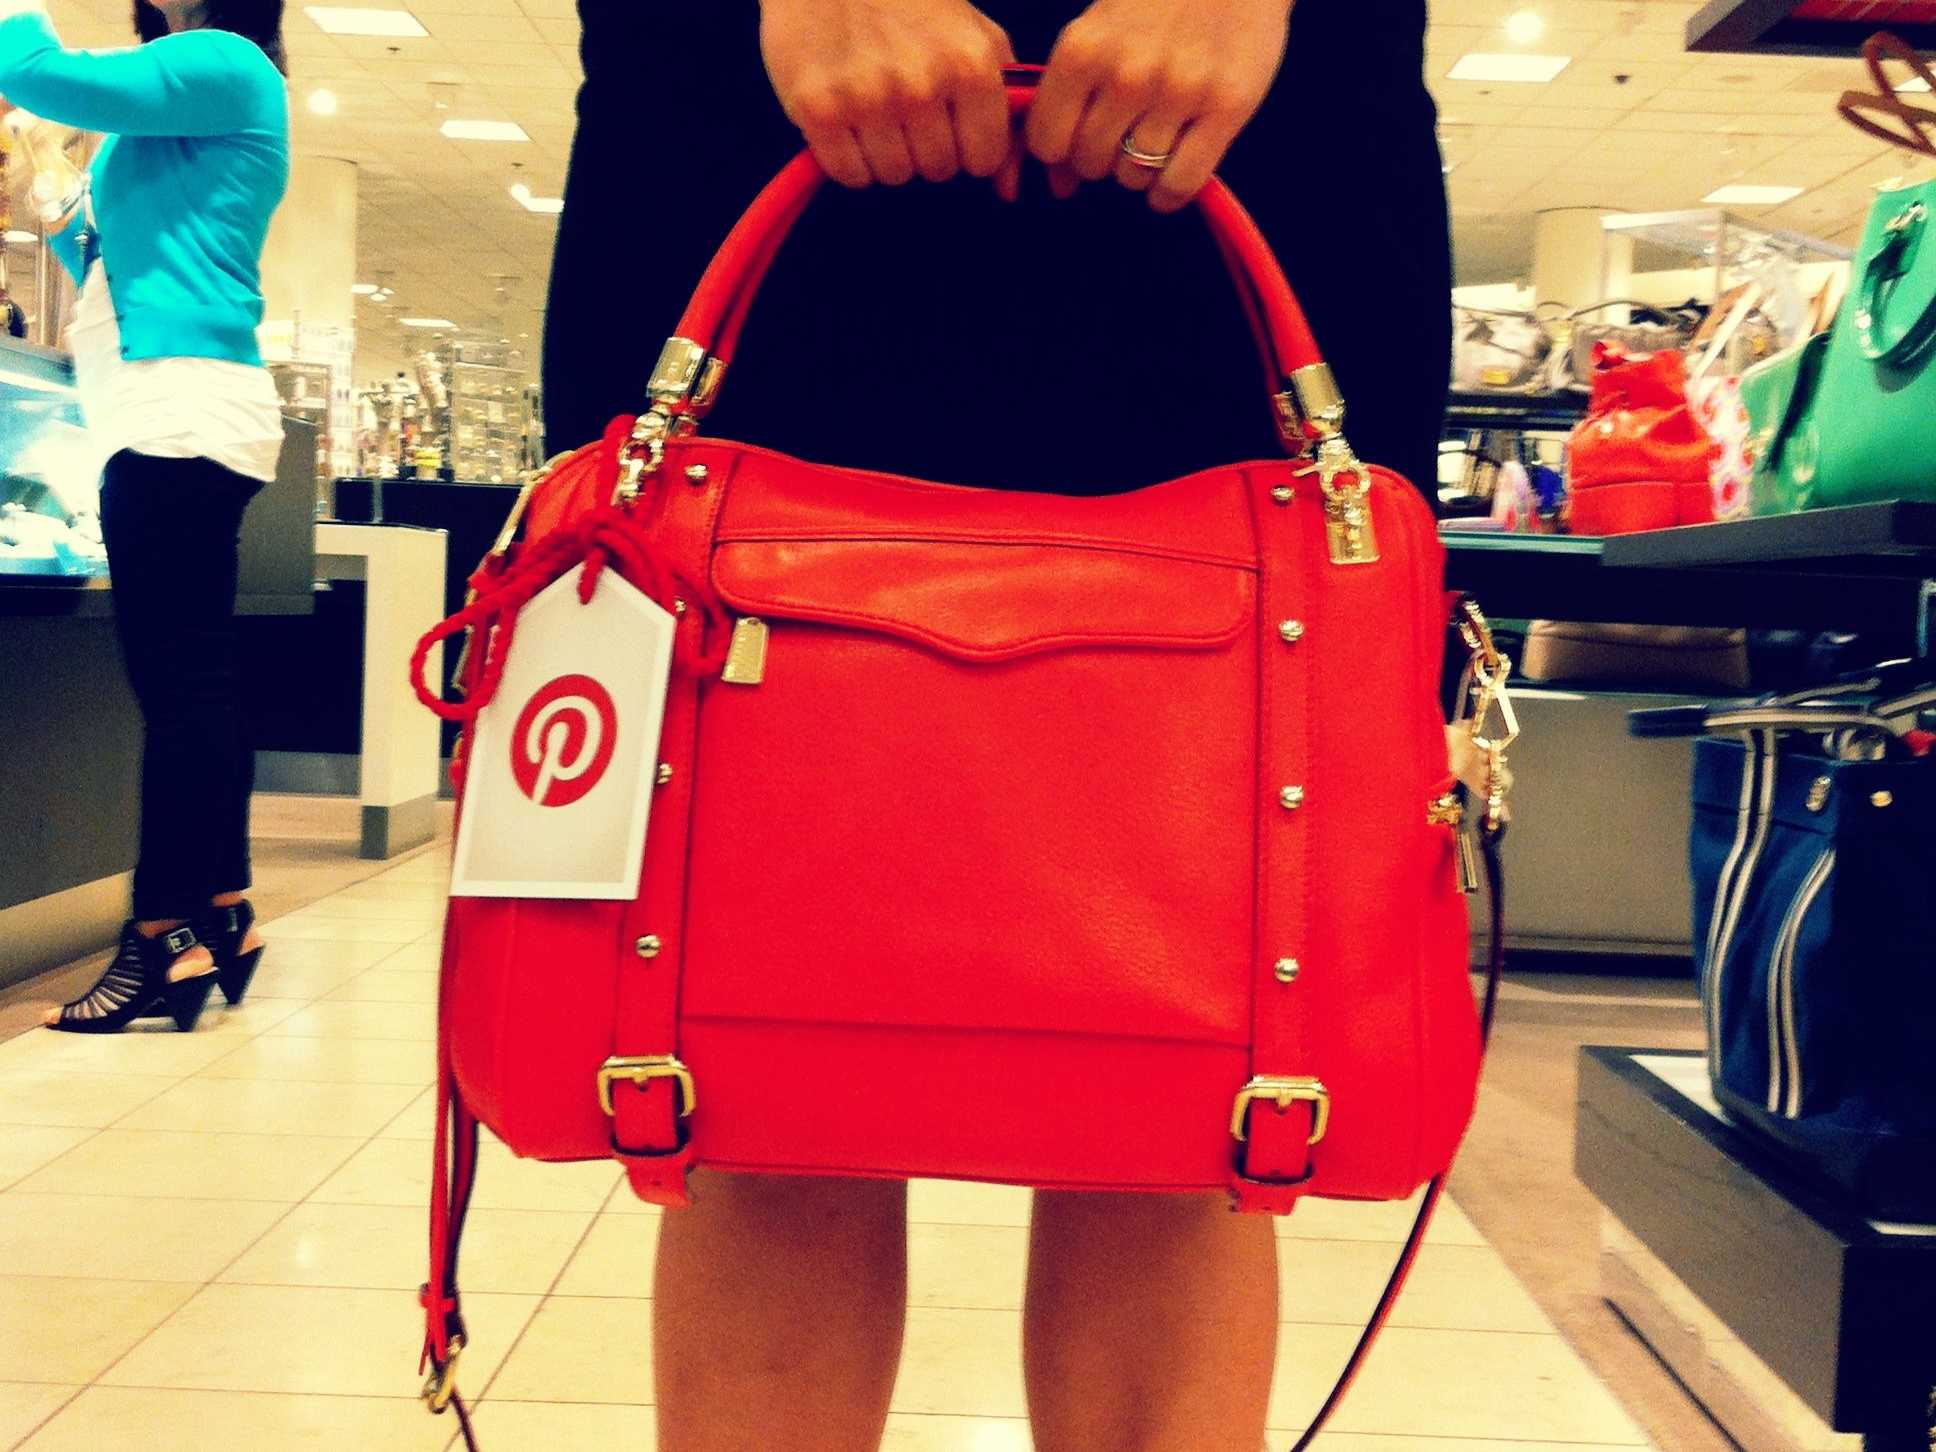 nordstrom could start using pinterest to make merchandising decisions